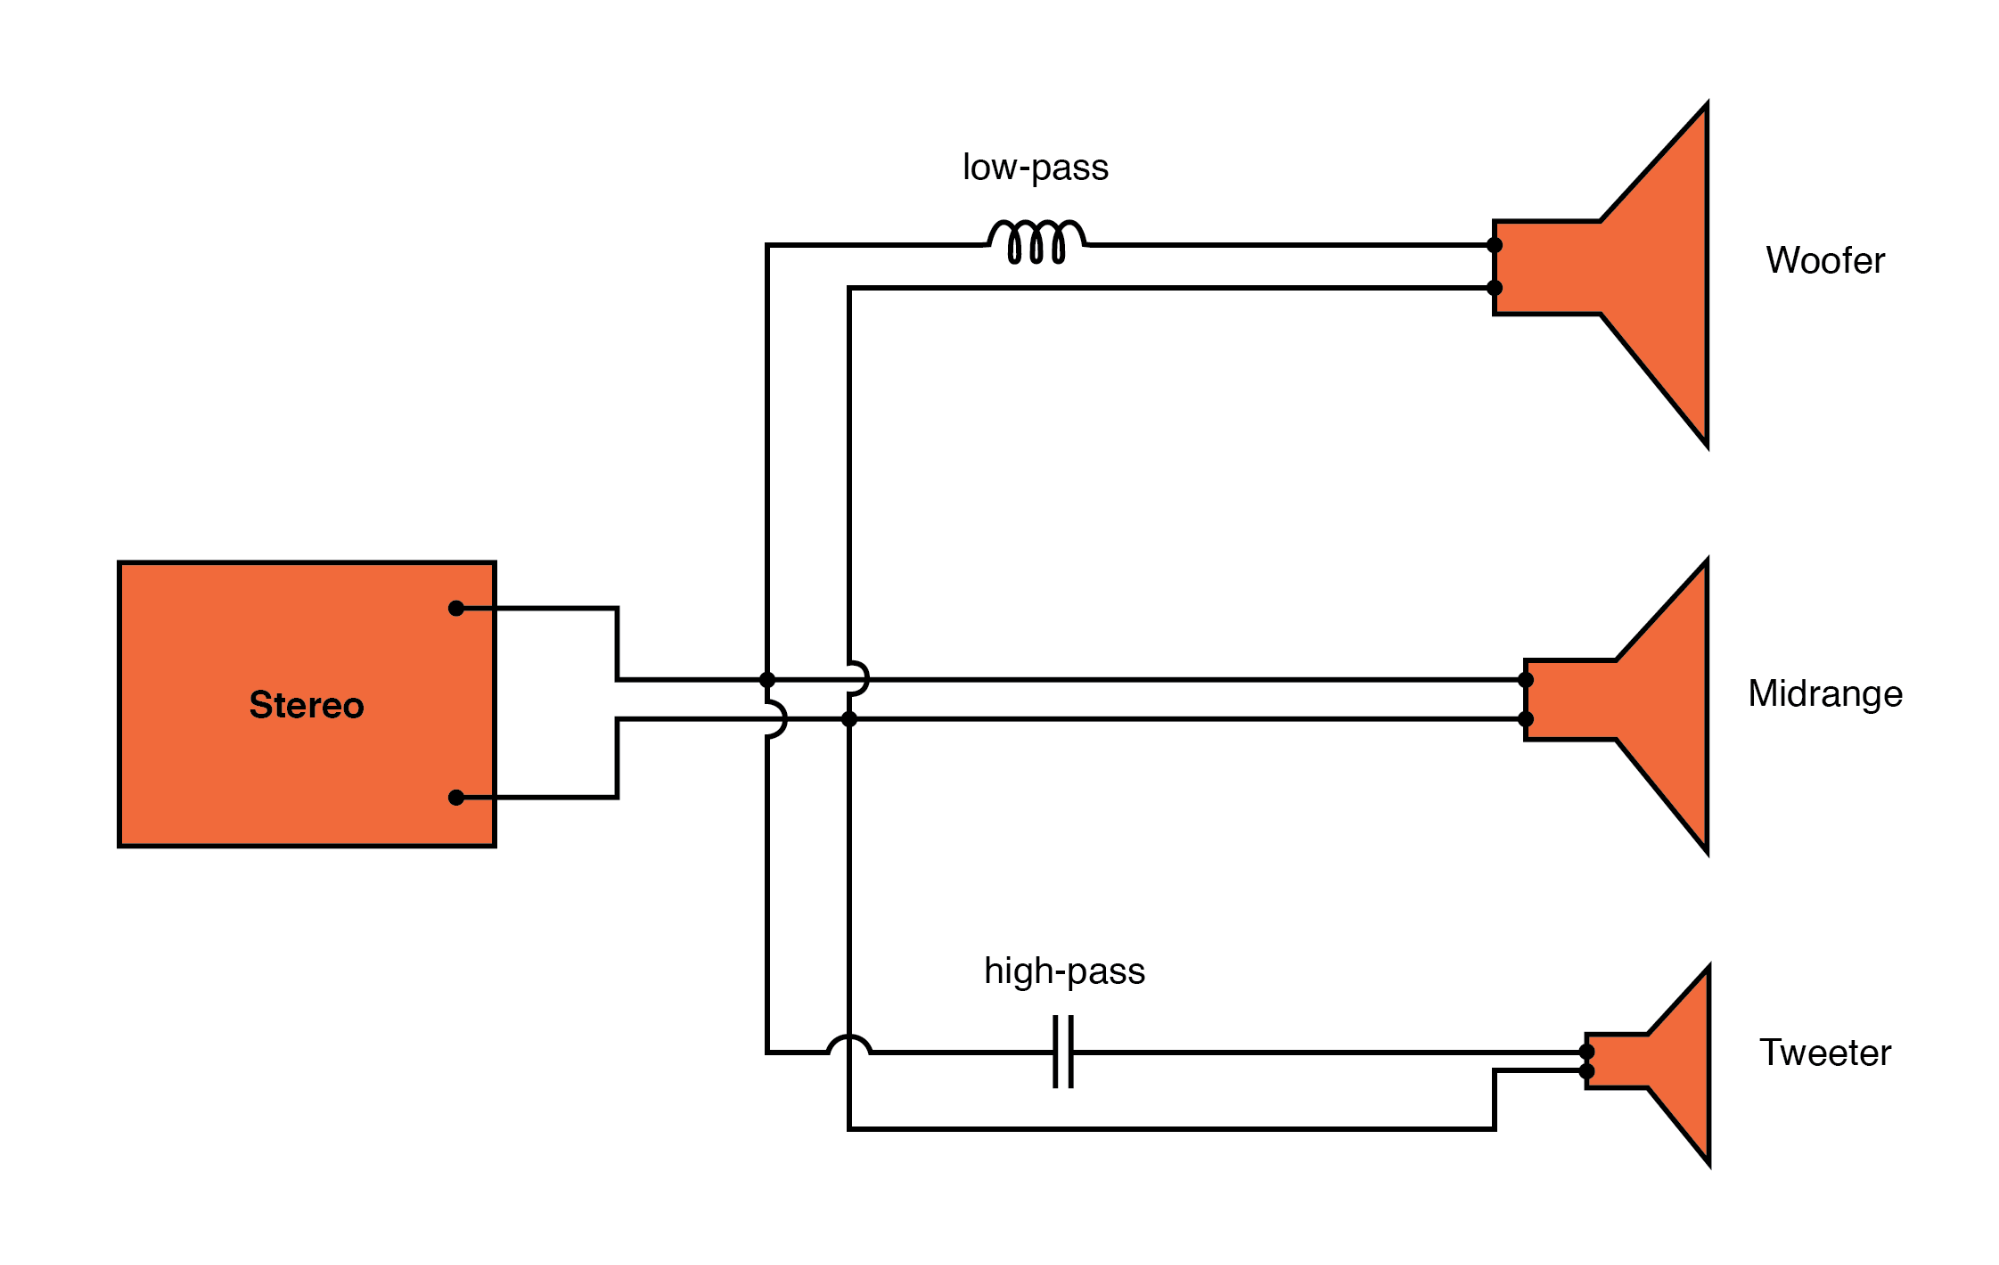 High-pass filter routes high frequencies to tweeter, while low-pass filter routes lows to woofer.